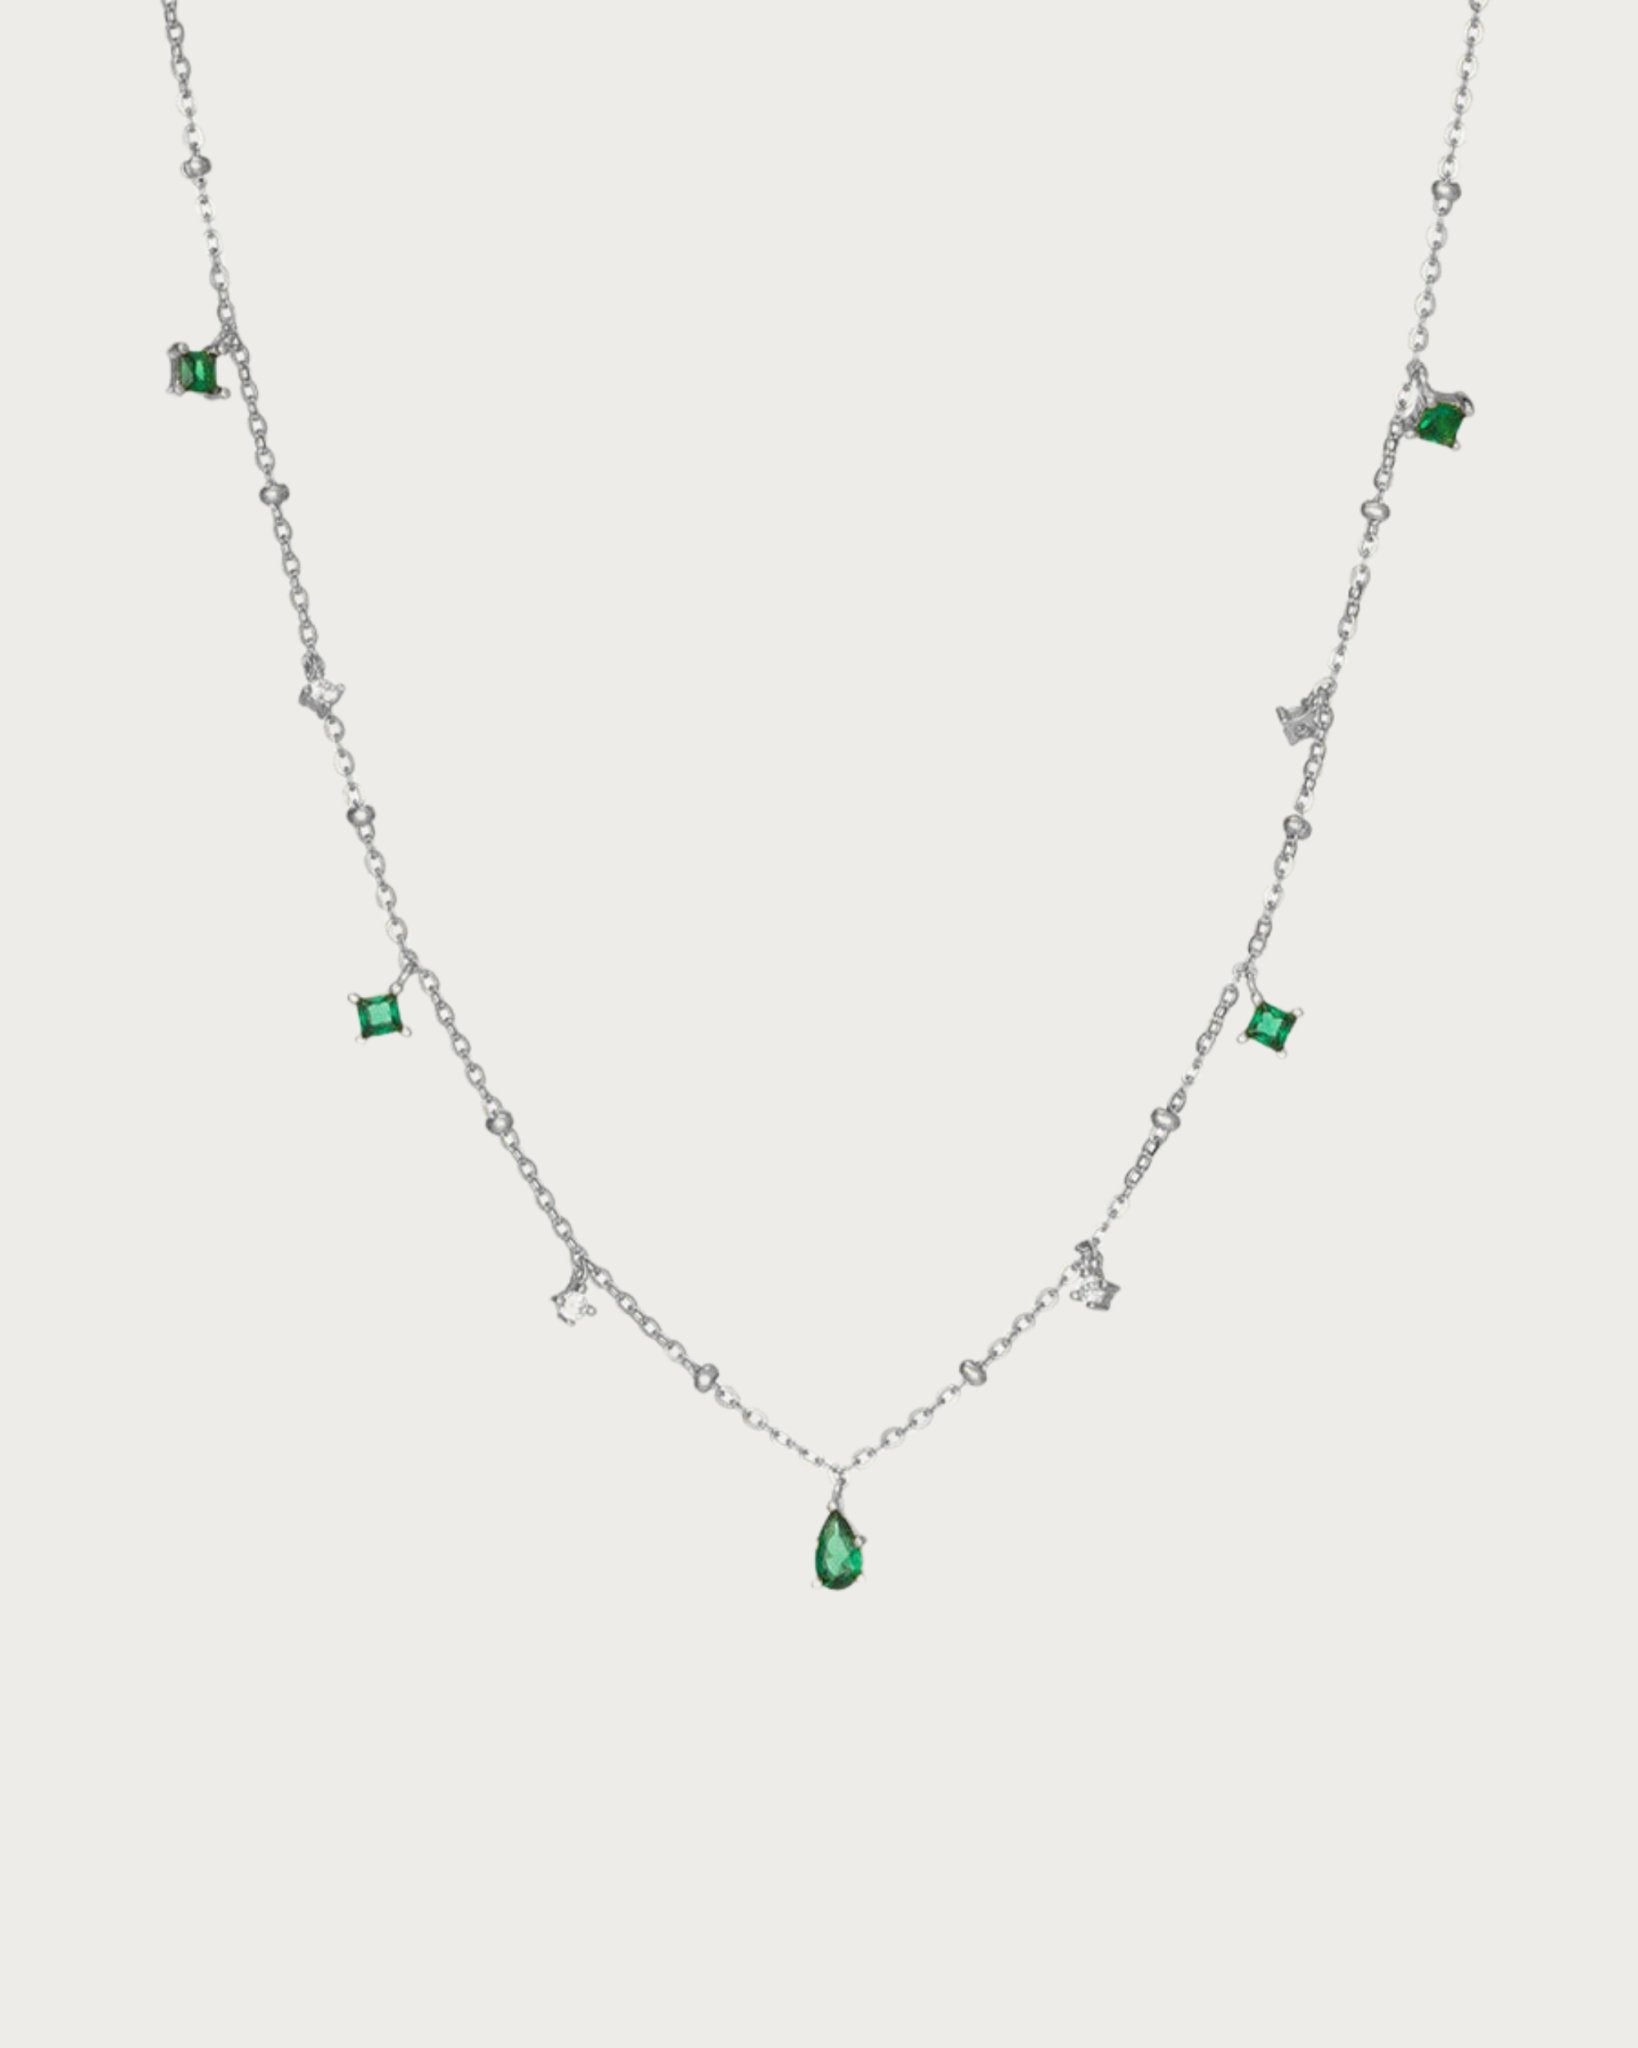 Silver Elysee Necklace in Emerald Green